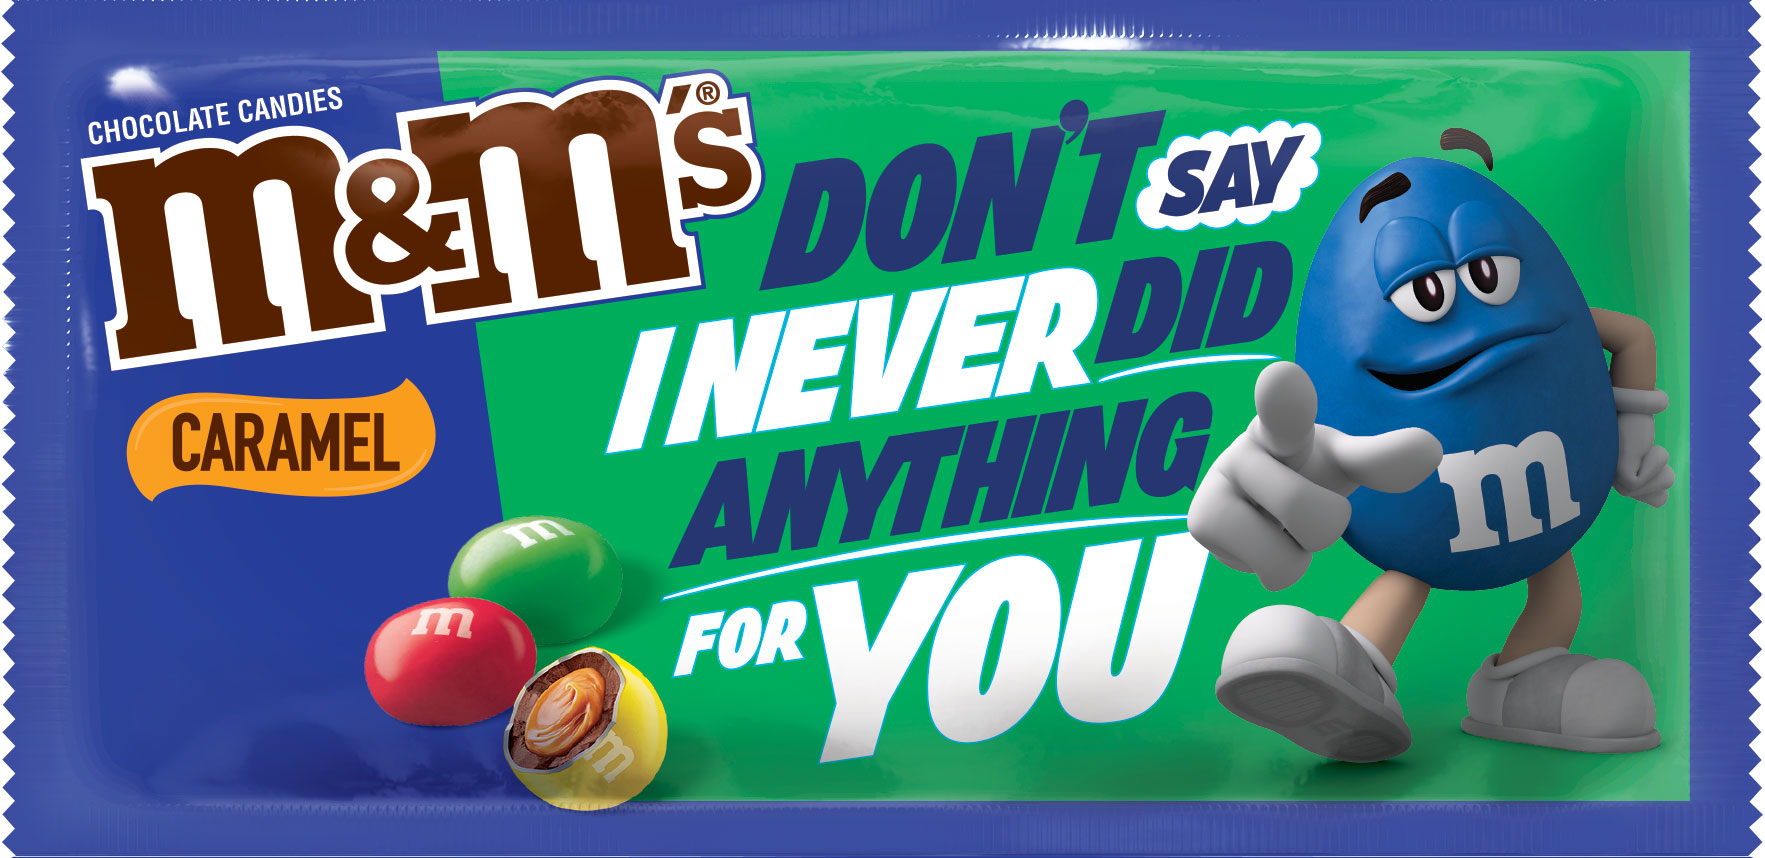 M&M's gets personal with limited edition packs for The US Oscars